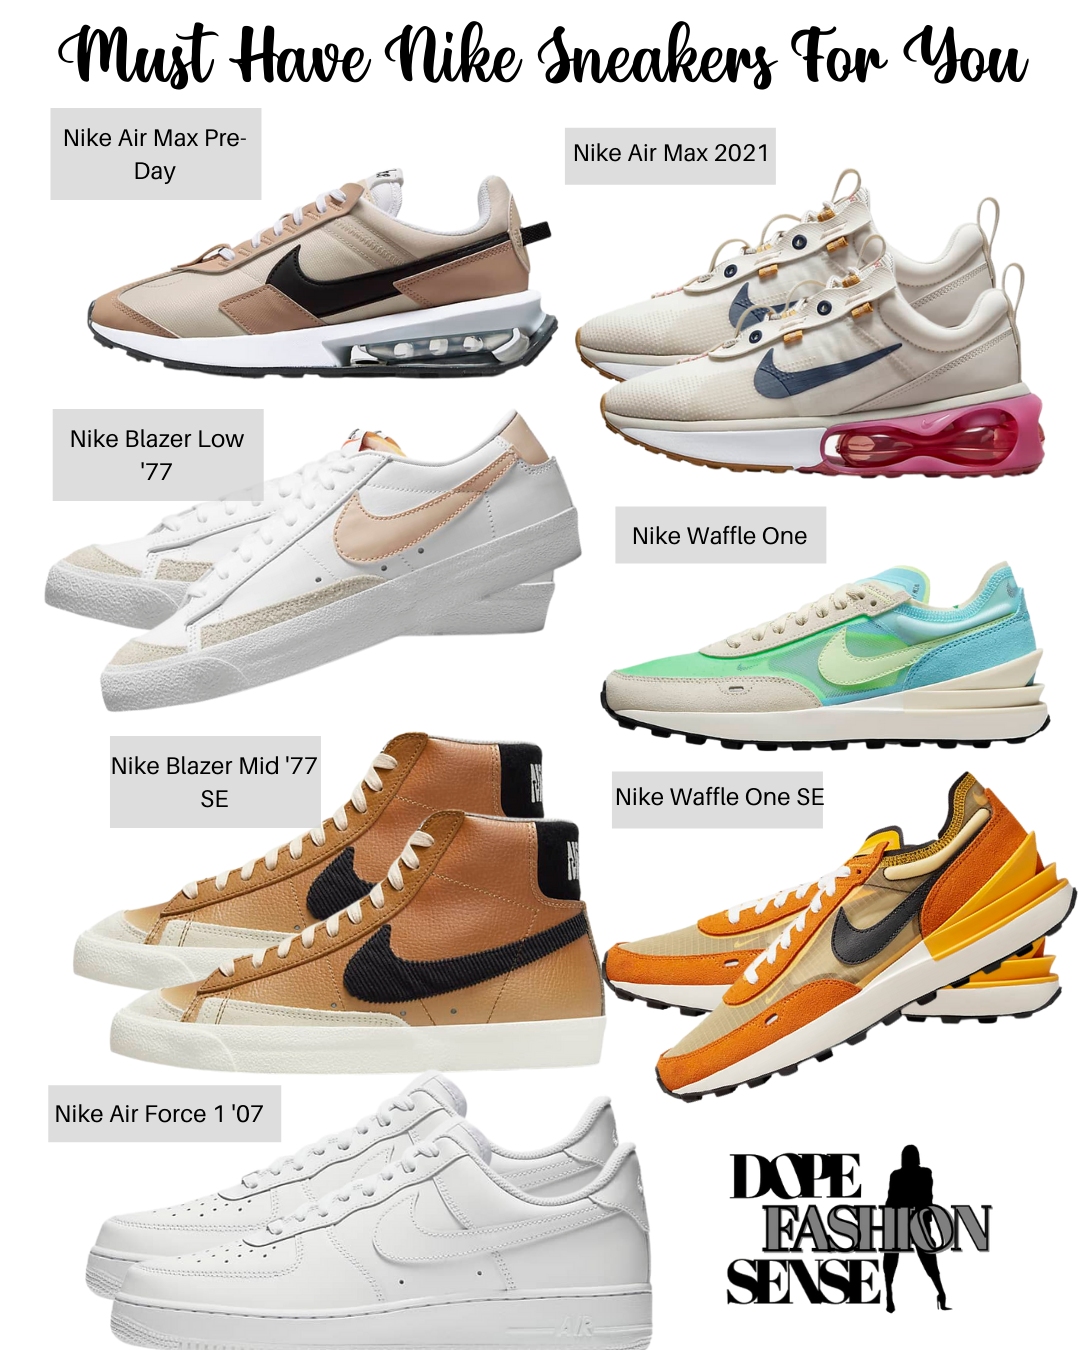 Polite inherit repose Nike Sneakers That All The Girlies Need To Have - Dope Fashion Sense